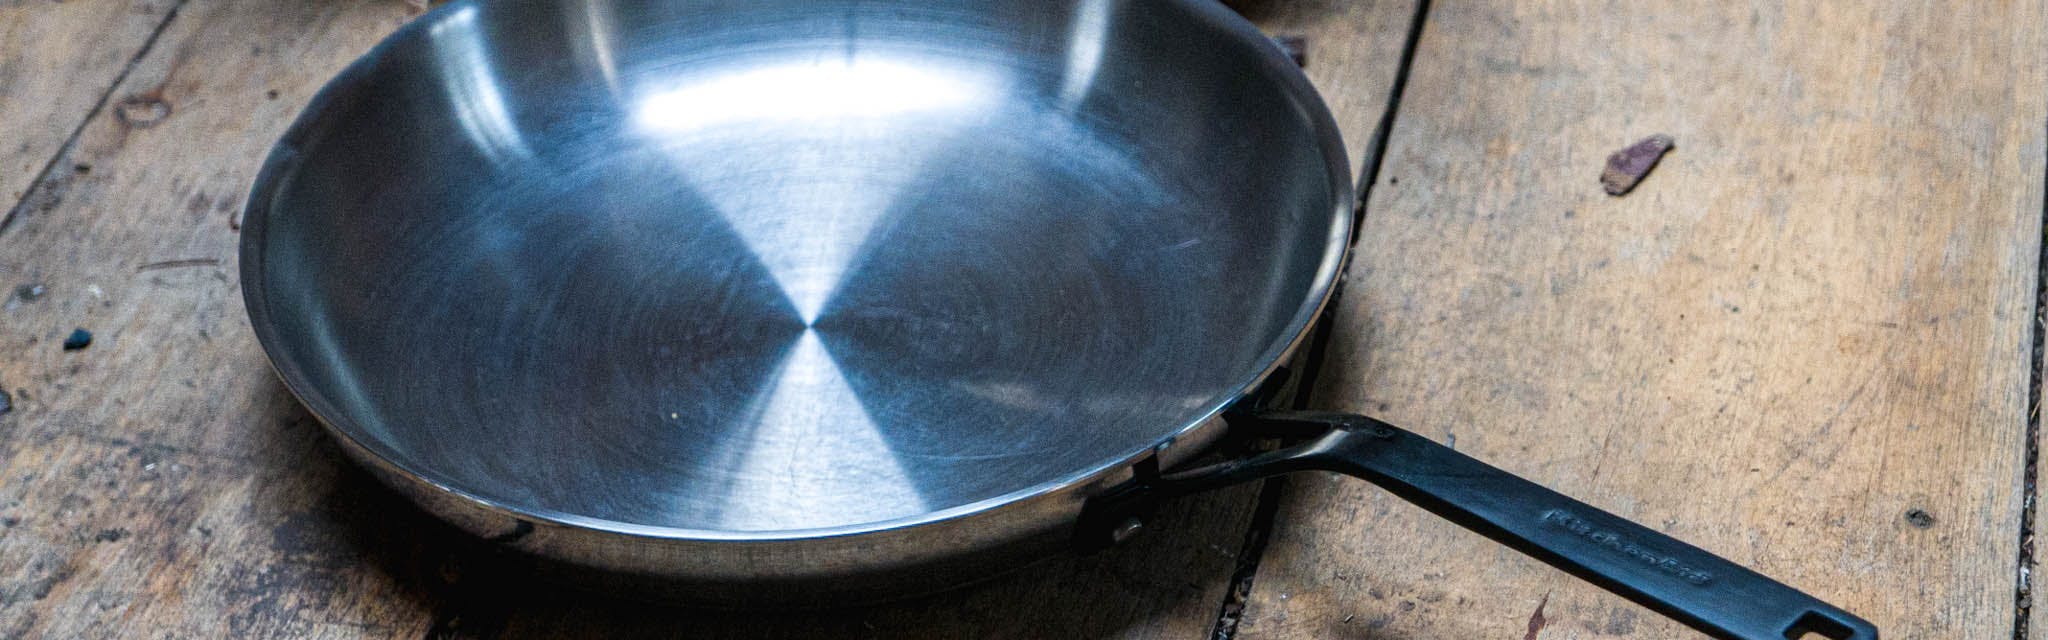 The KitchenAid 5-Ply Clad Stainless Steel Induction Frying Pan, 12.25-Inch, Polished Stainless Steel.